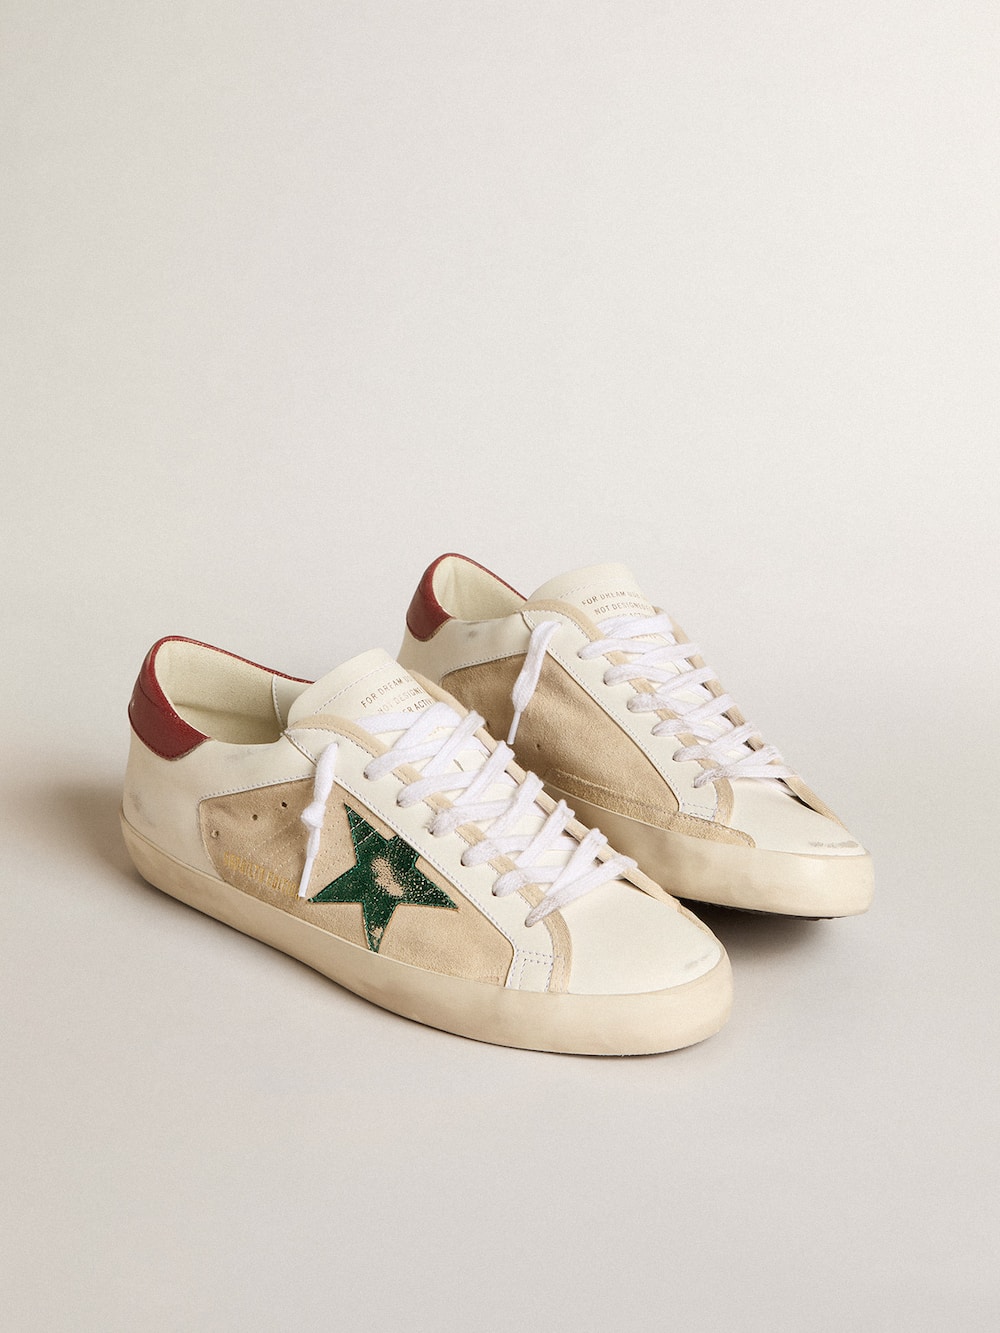 Golden Goose - Super-Star LTD in suede with green metallic star and red heel tab in 